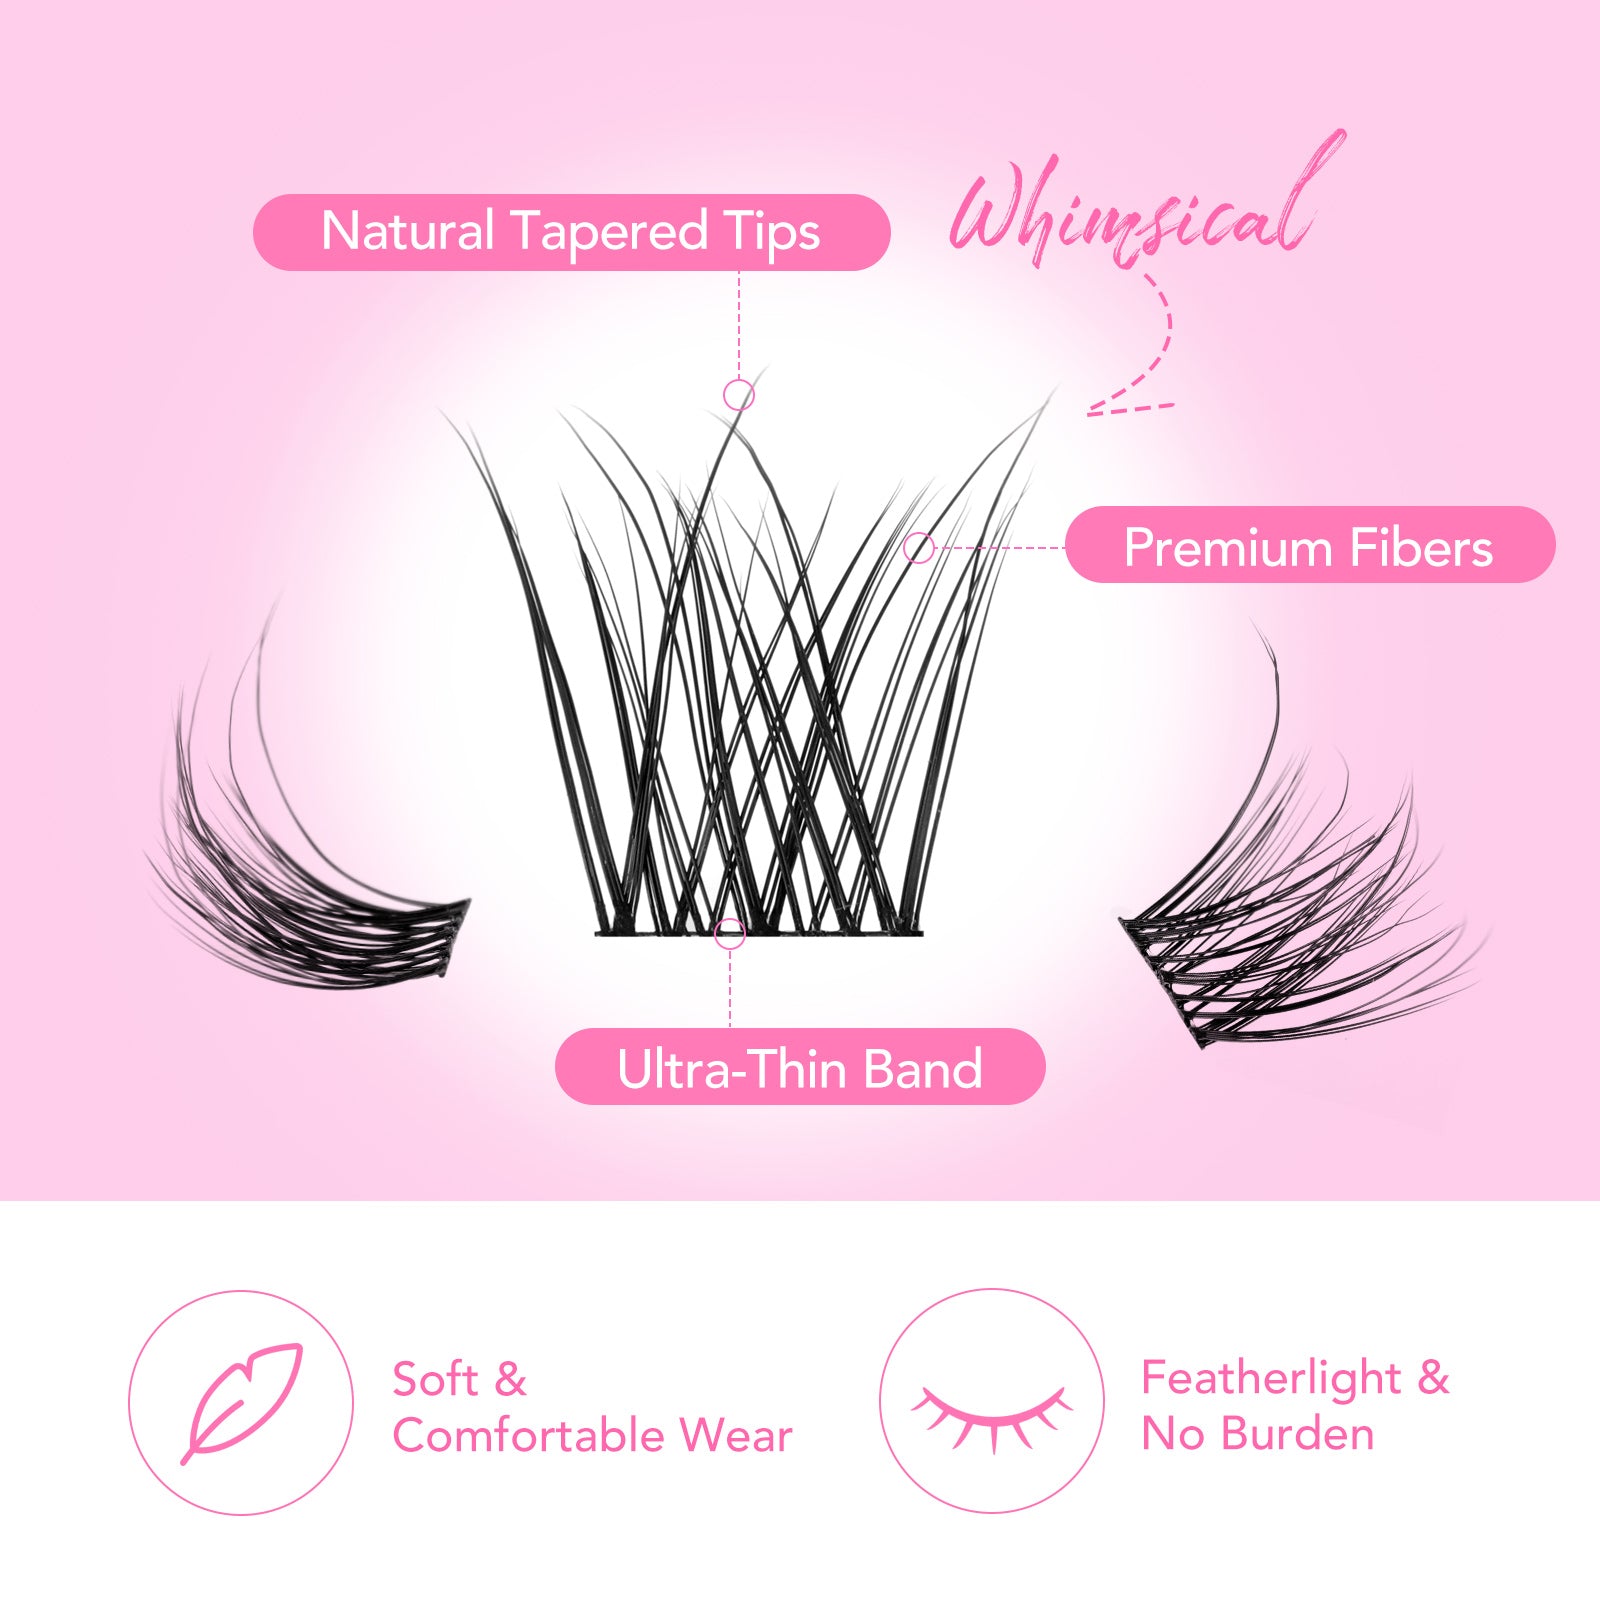 Whimsical DIY Cluster Lashes